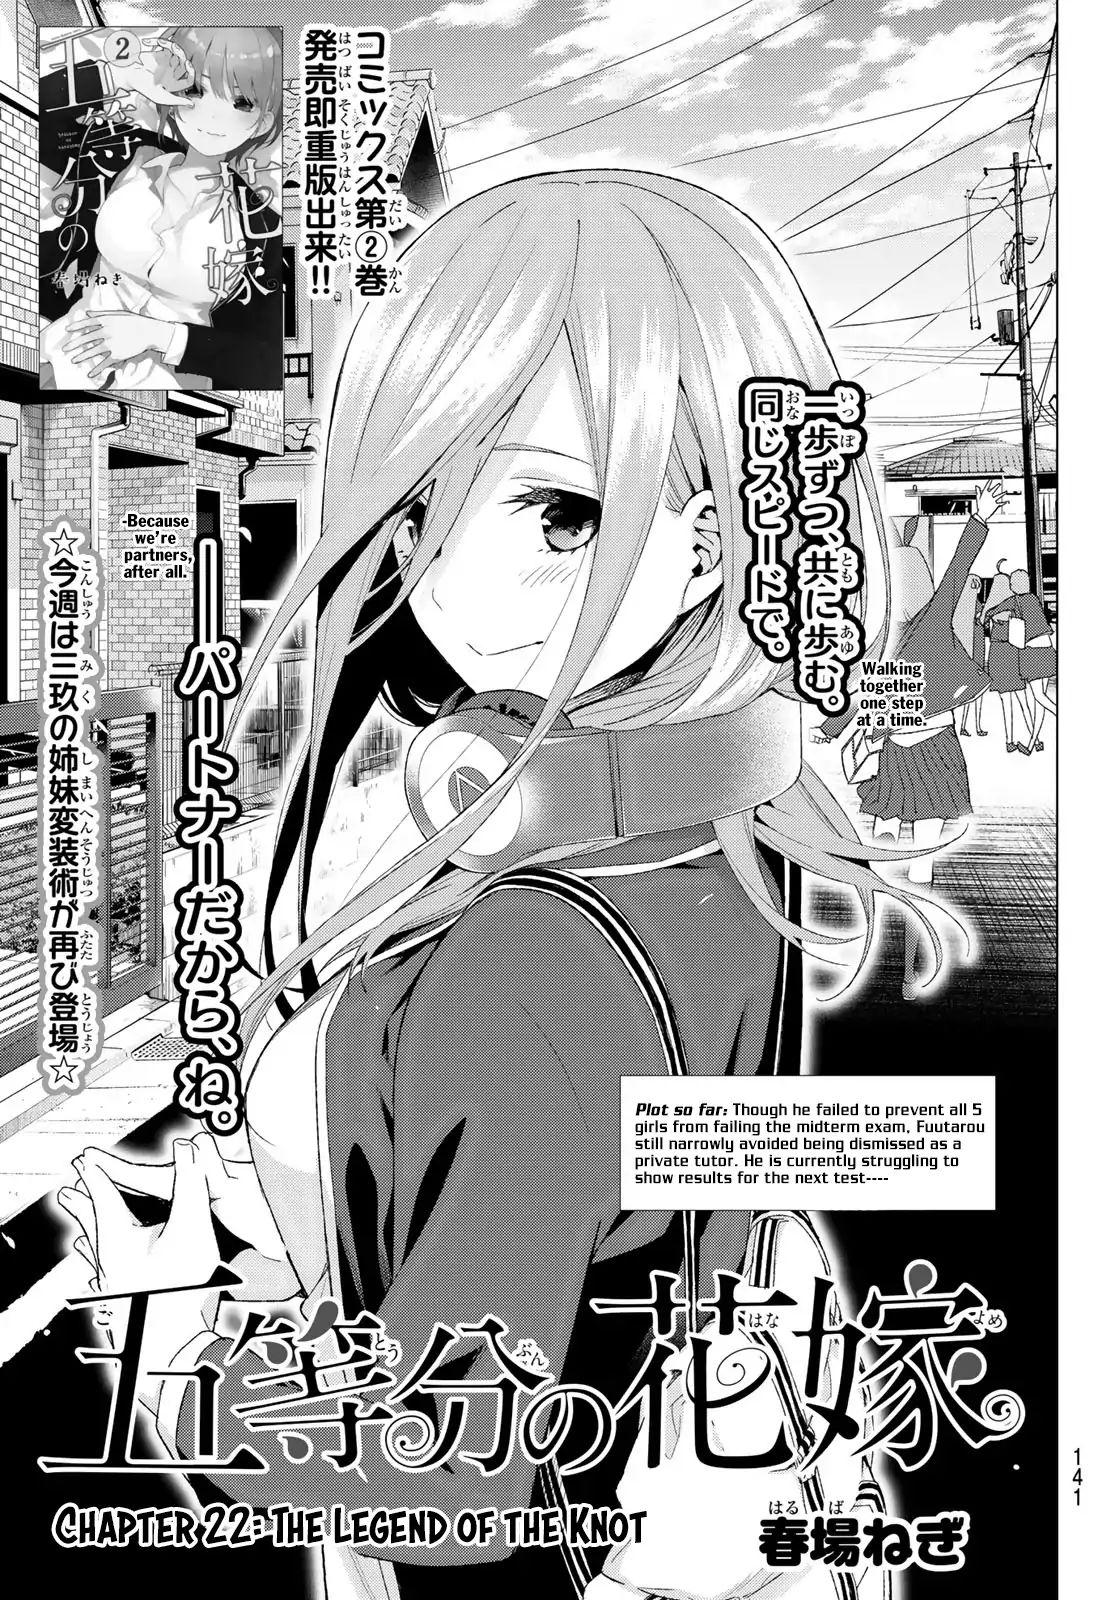 Go-Toubun No Hanayome Vol.3 Chapter 22: The Legend Of The Knot - Picture 2